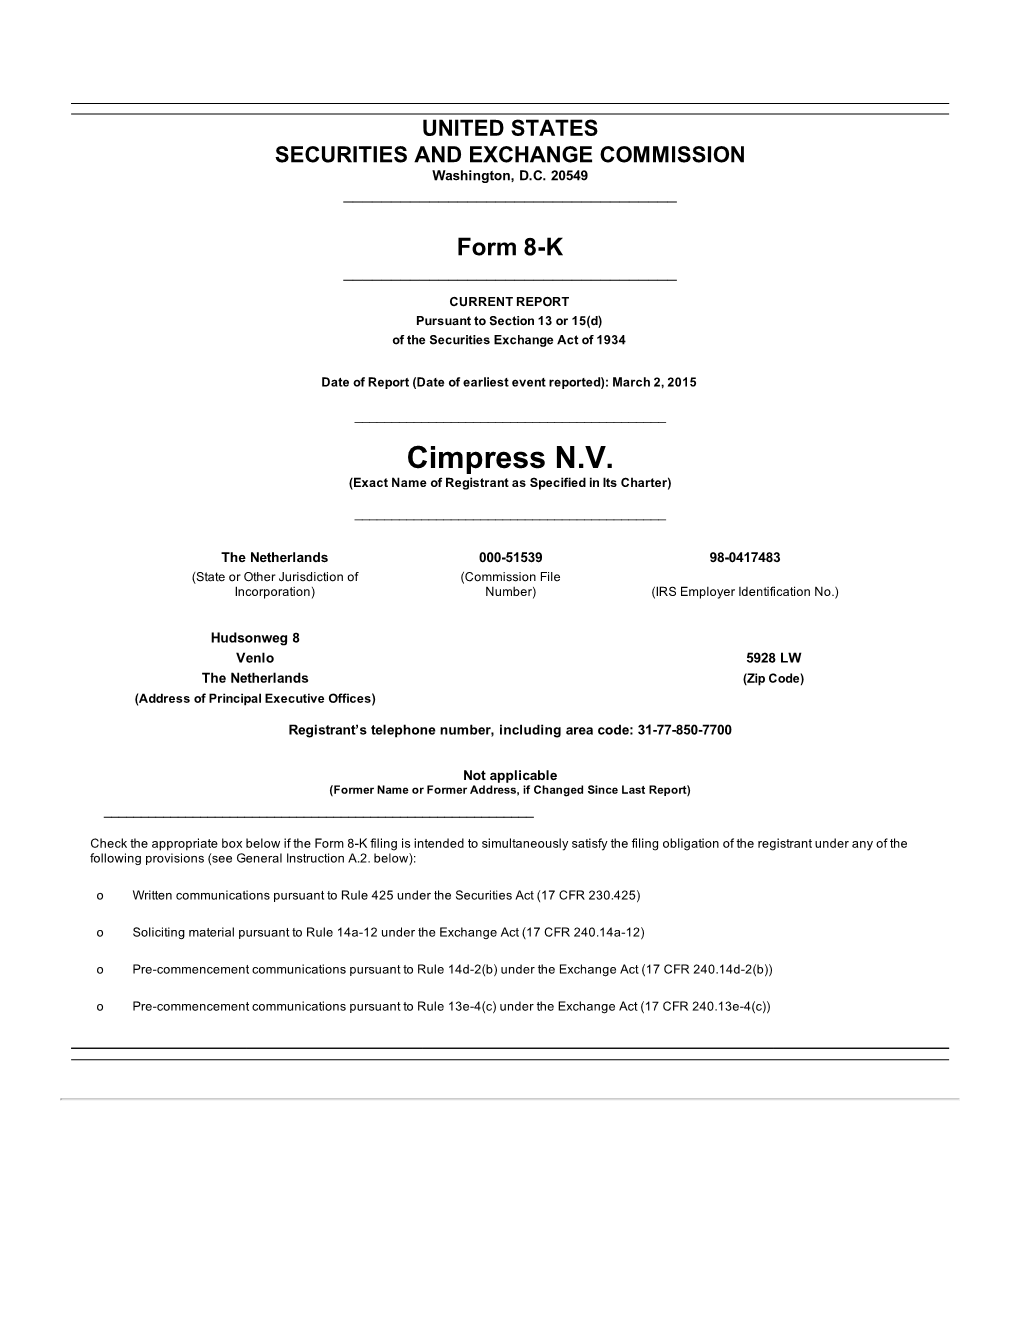 Cimpress N.V. (Exact Name of Registrant As Specified in Its Charter)